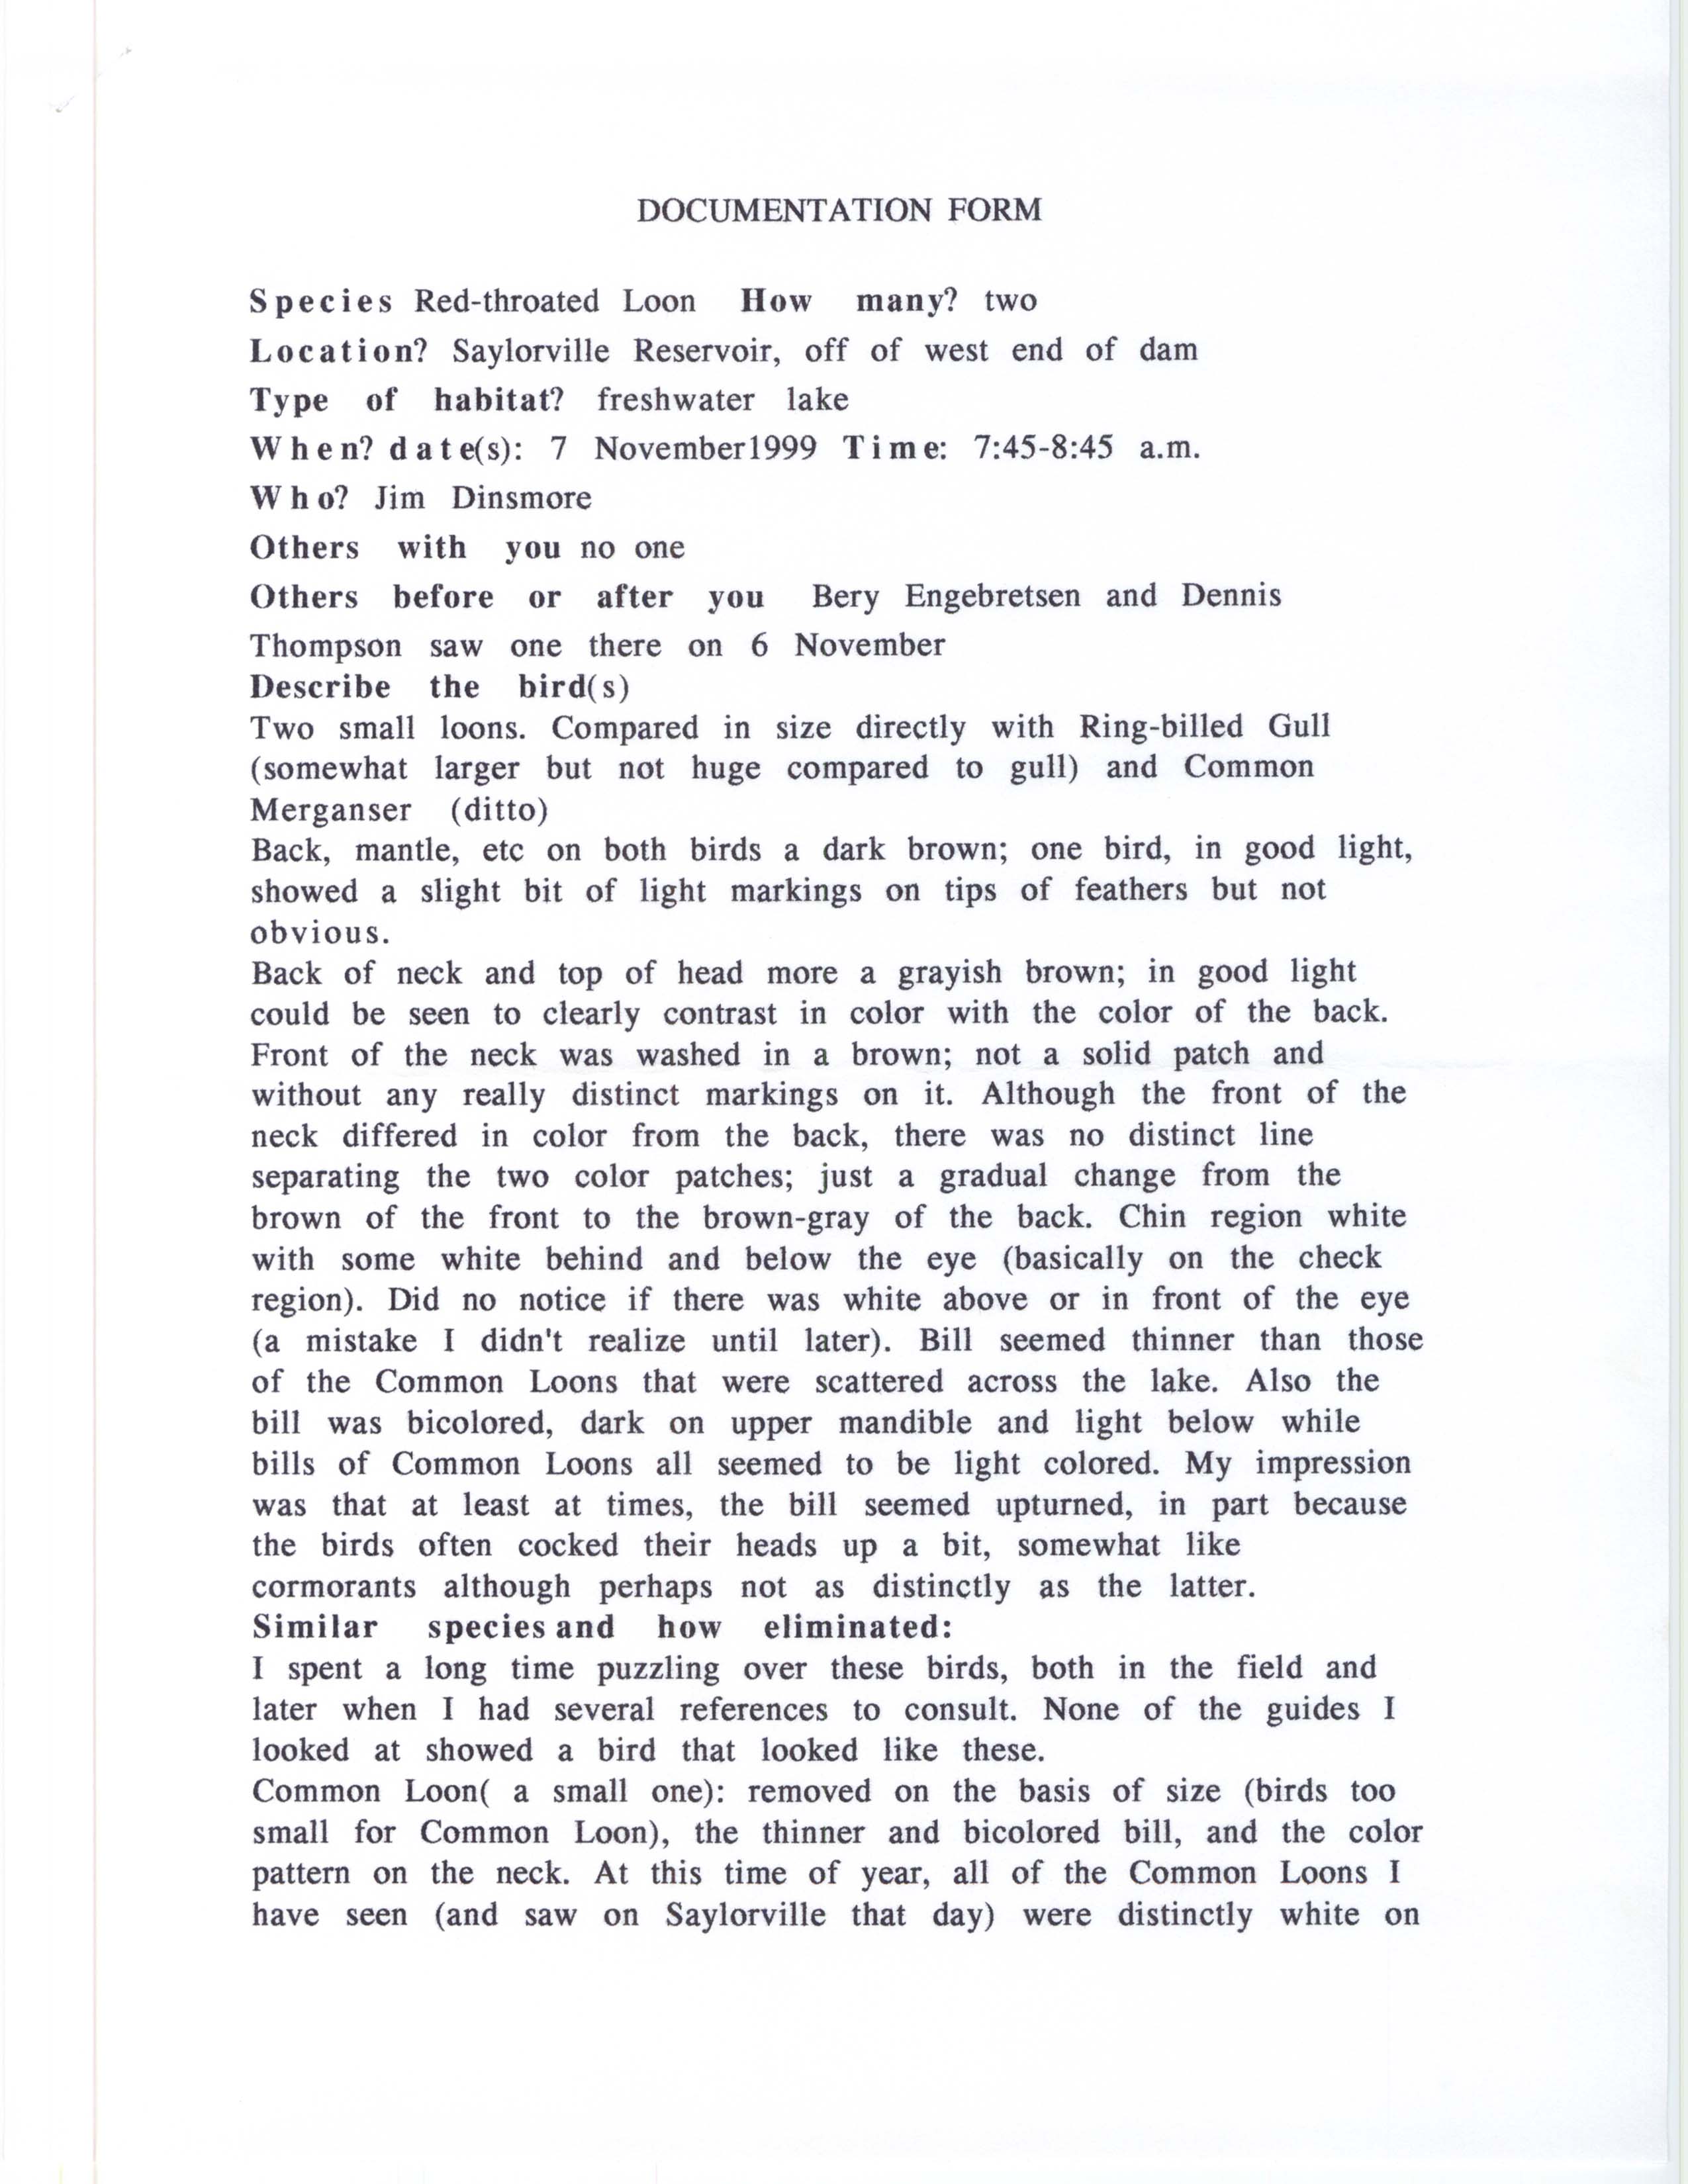 Rare bird documentation form for Red-throated Loon at Saylorville Reservoir, 1999